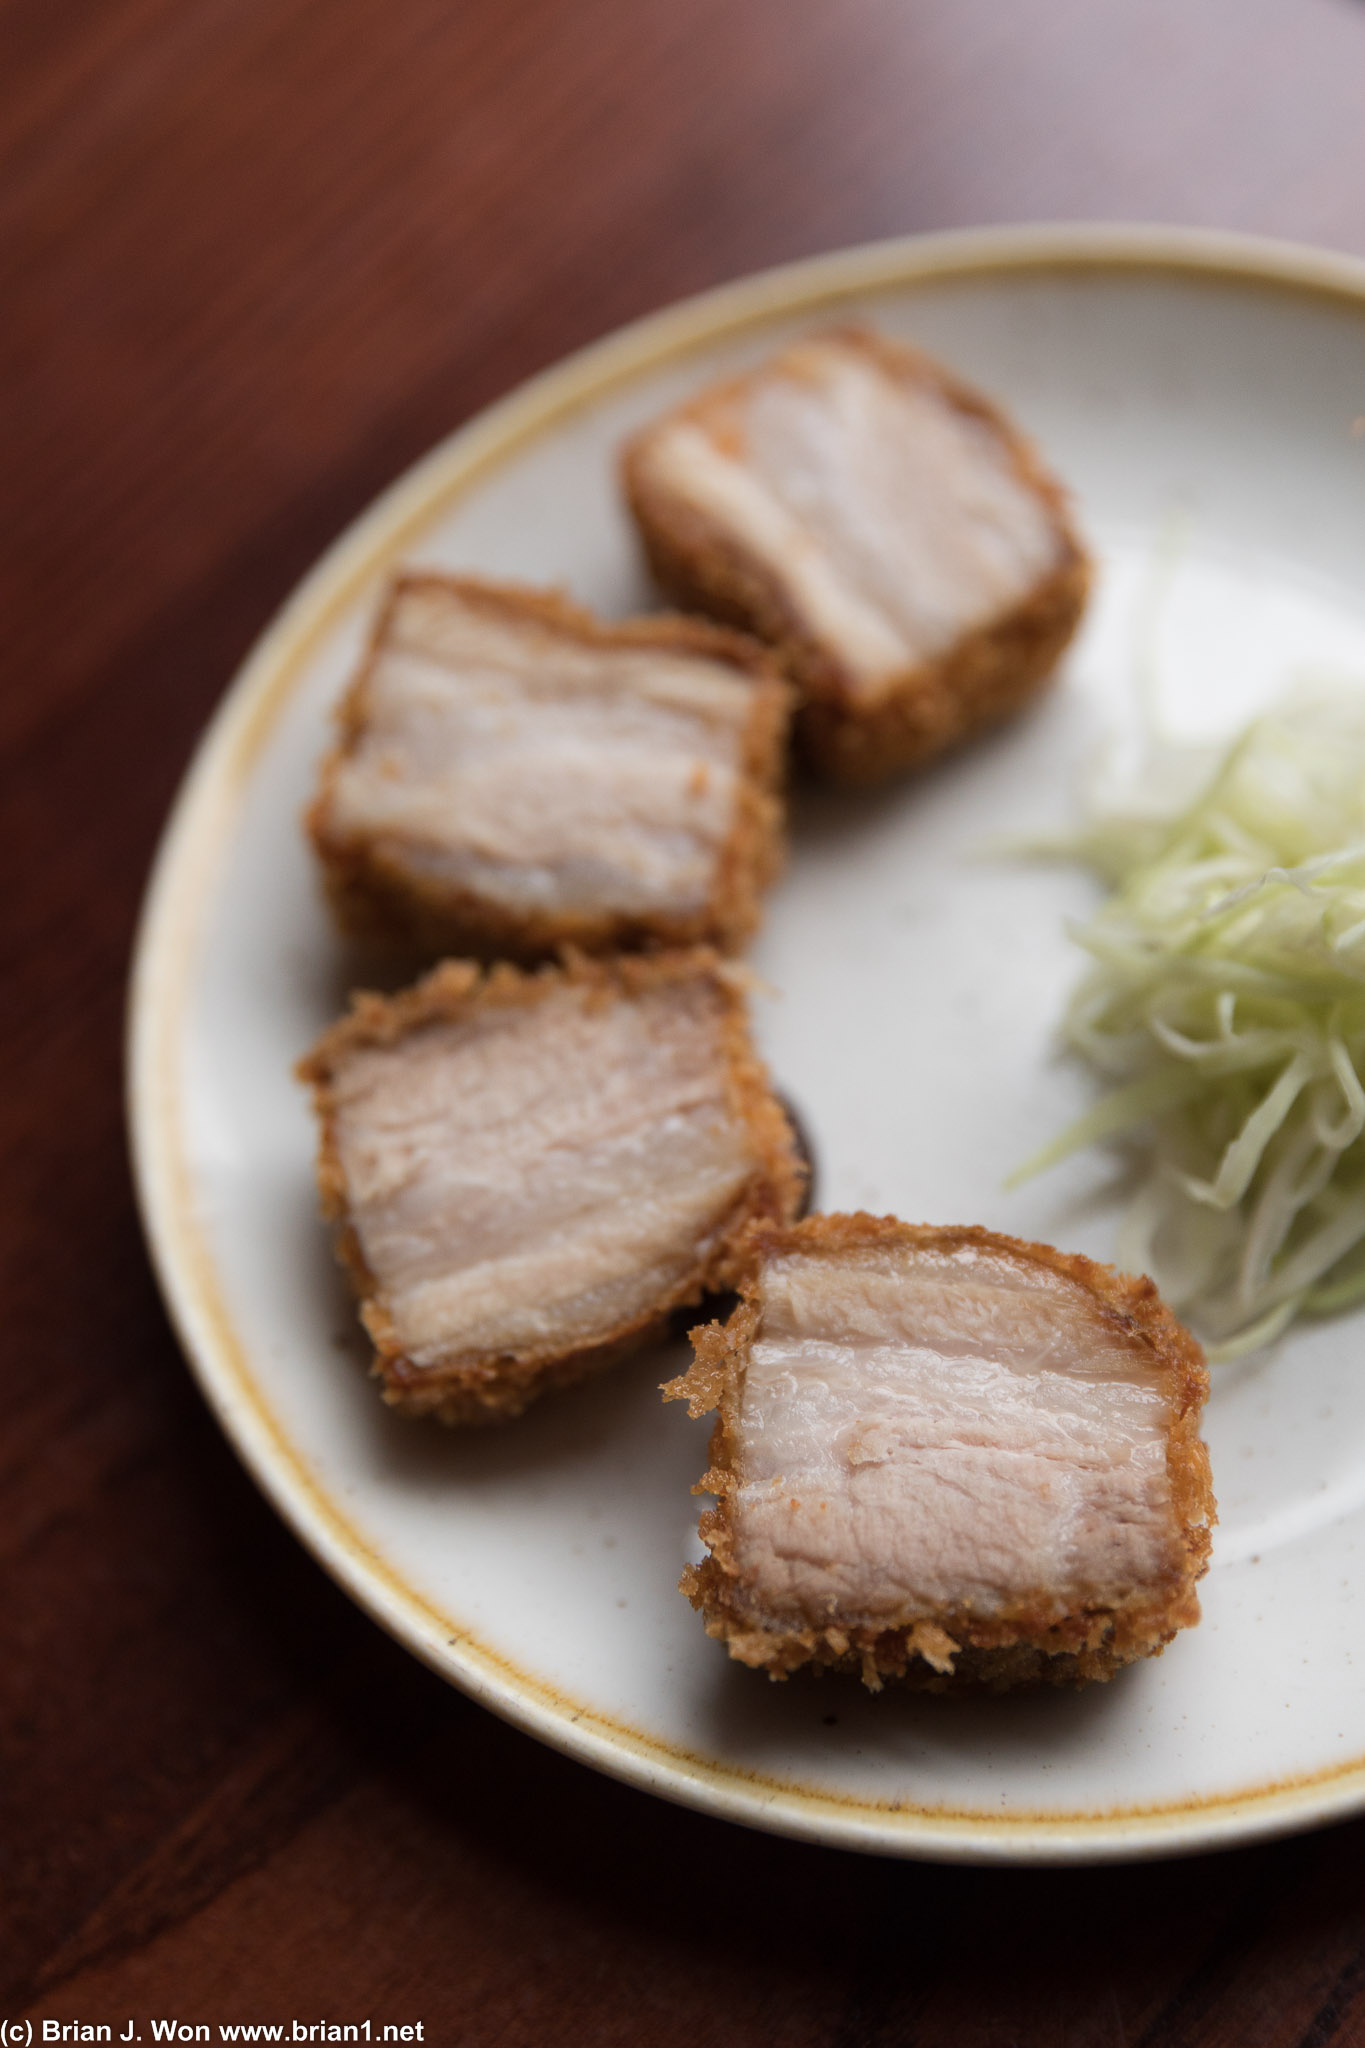 Crispy pork belly was a cross between Japanese and Chinese. Yum.